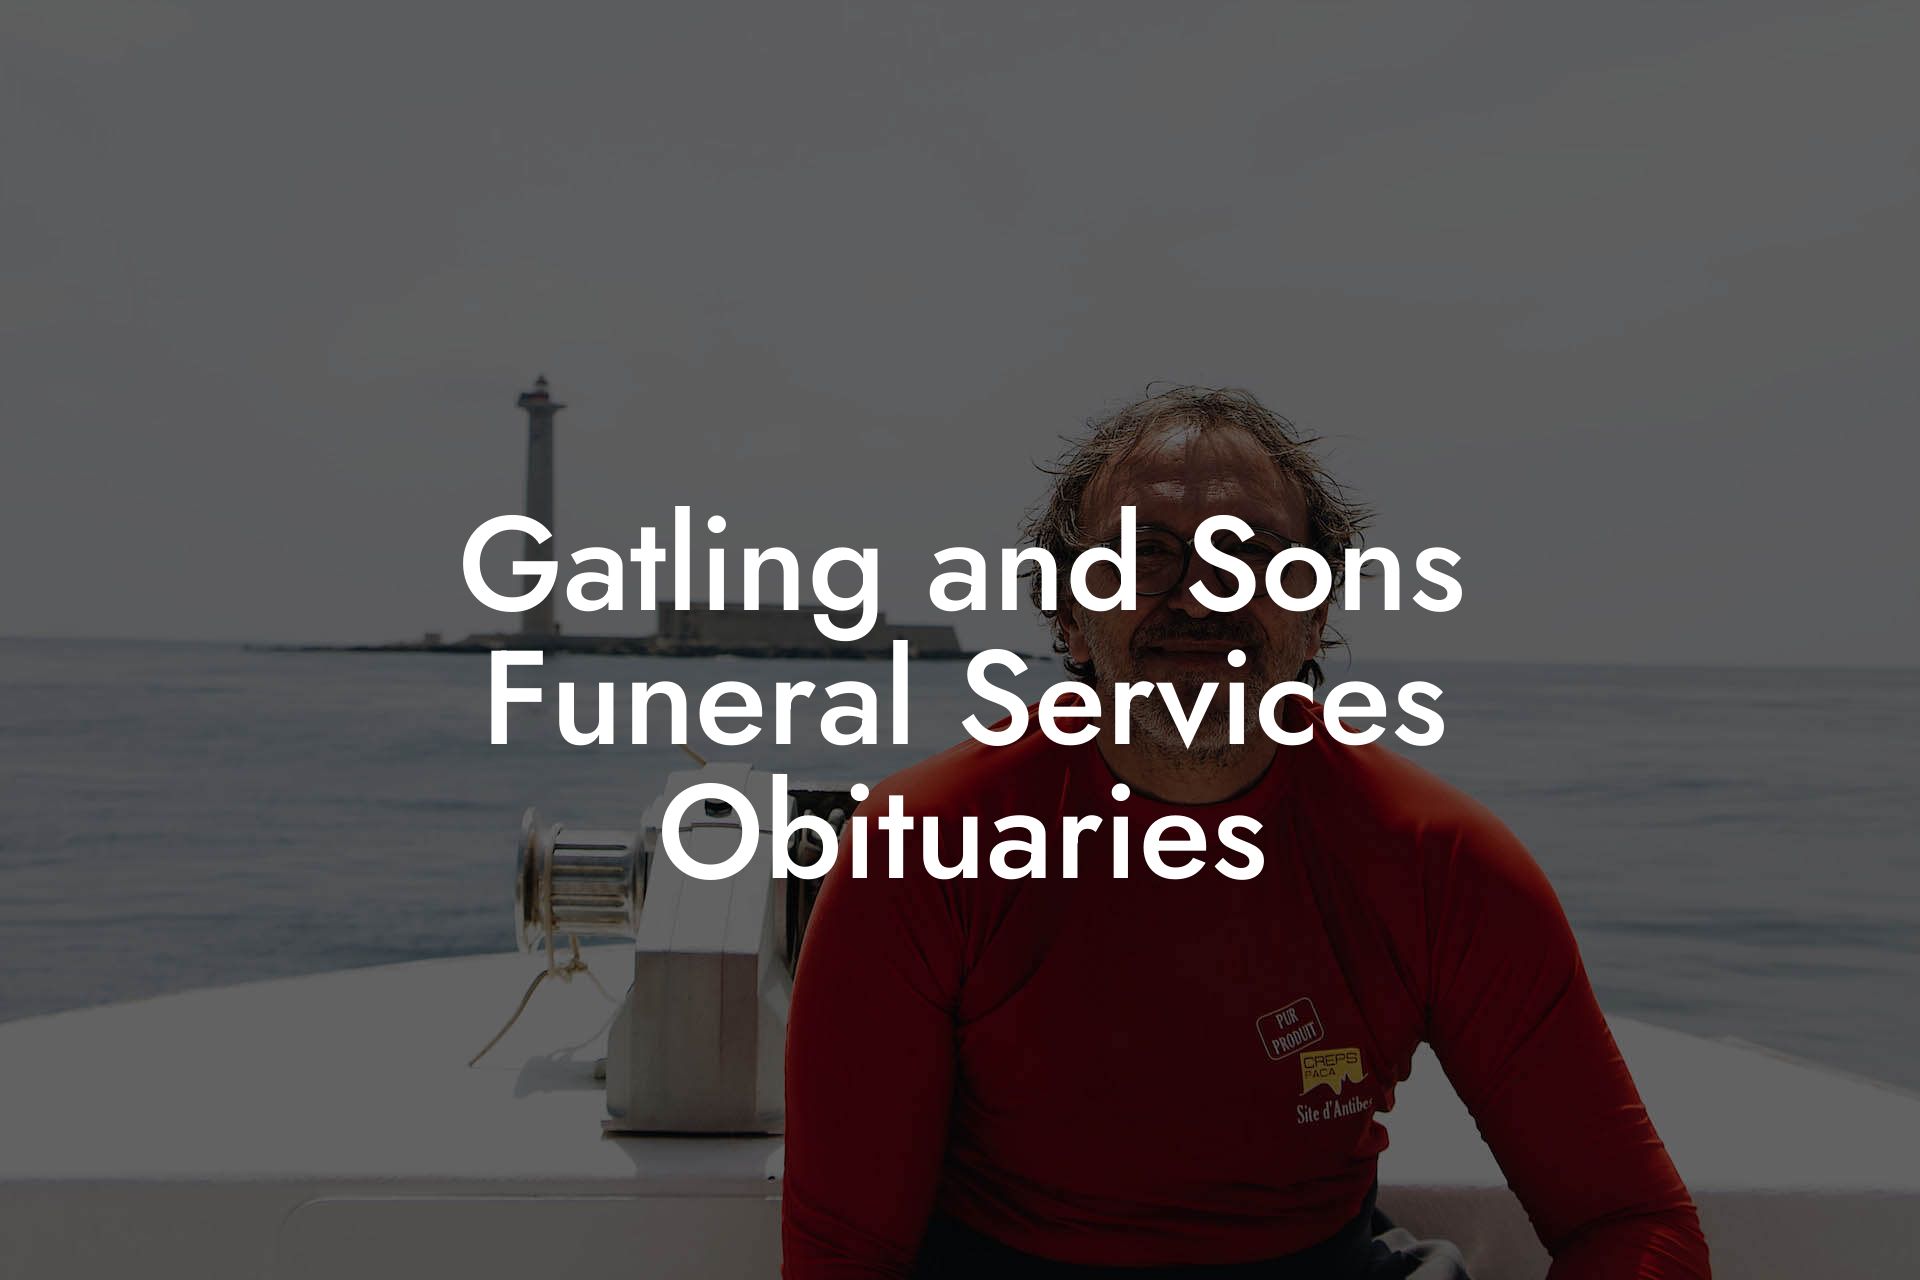 Gatling and Sons Funeral Services Obituaries